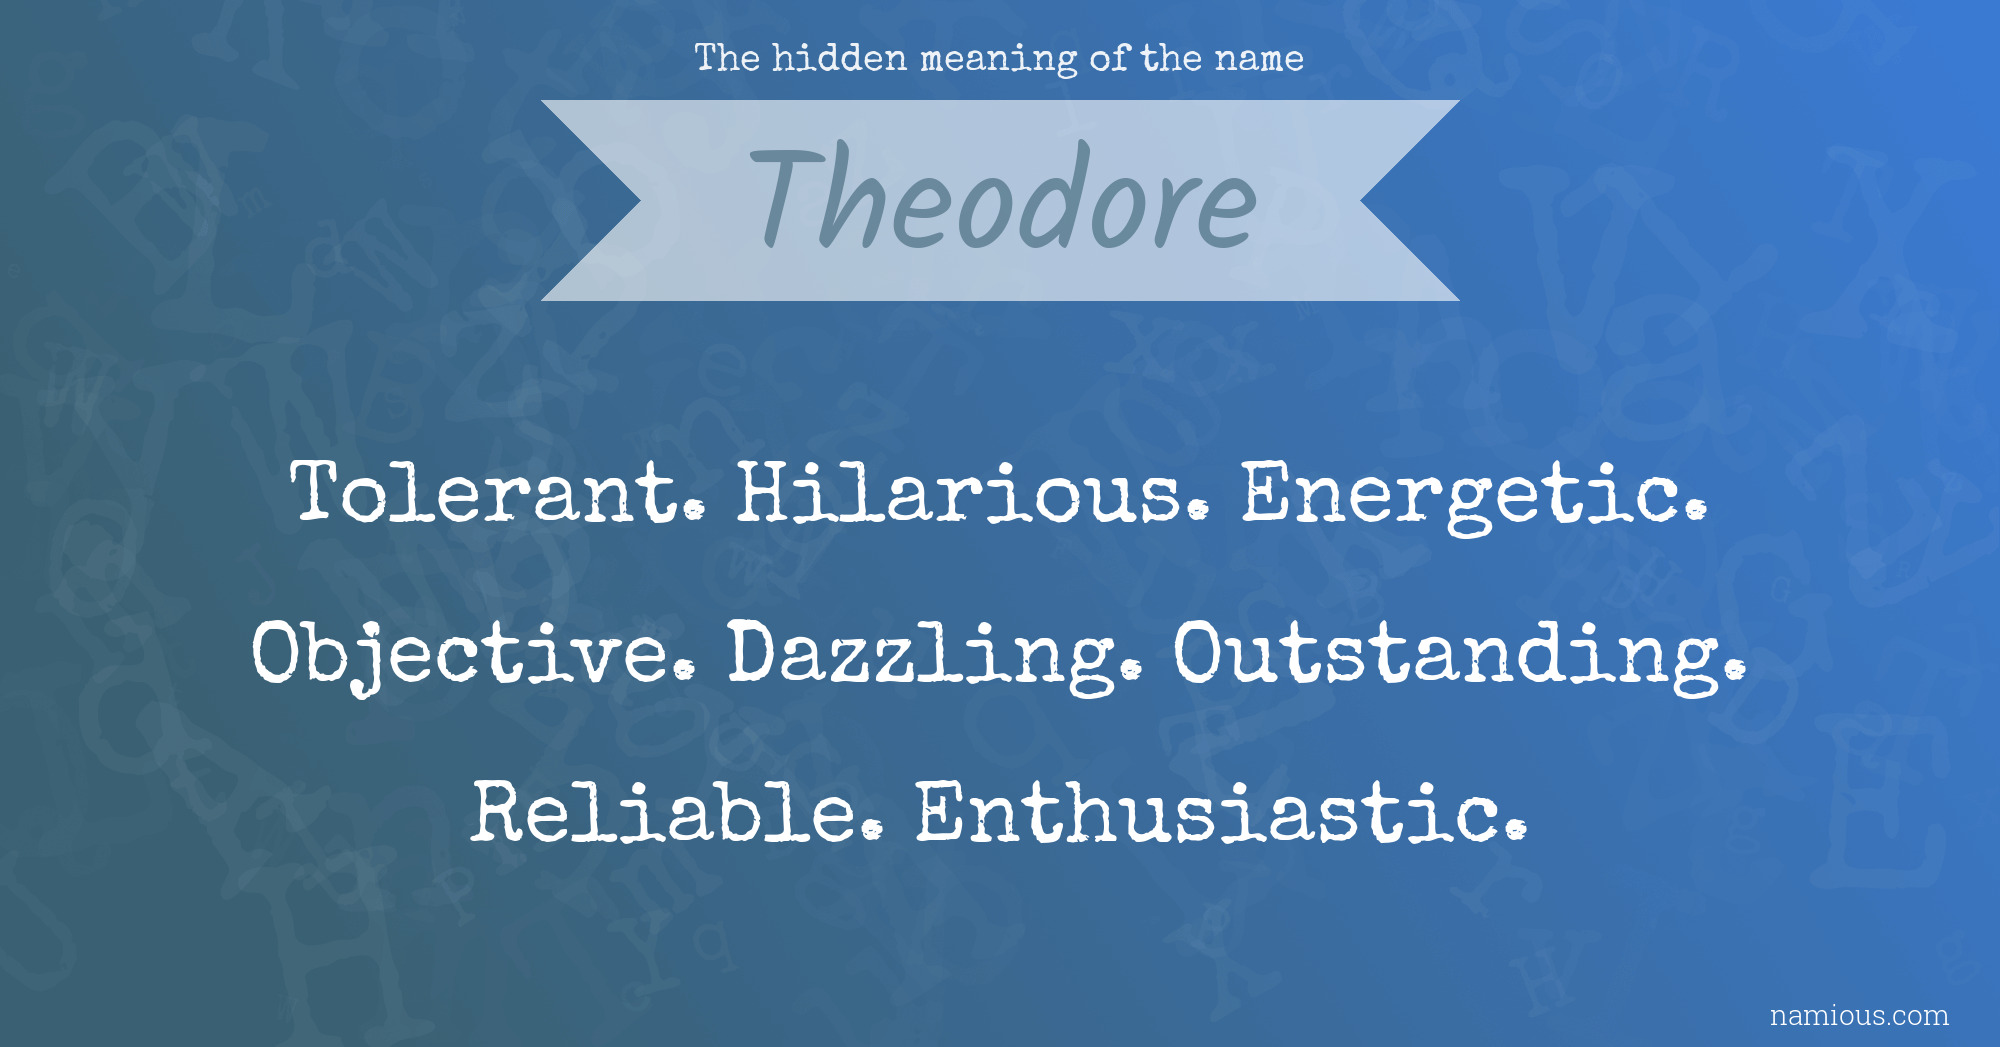 The hidden meaning of the name Theodore